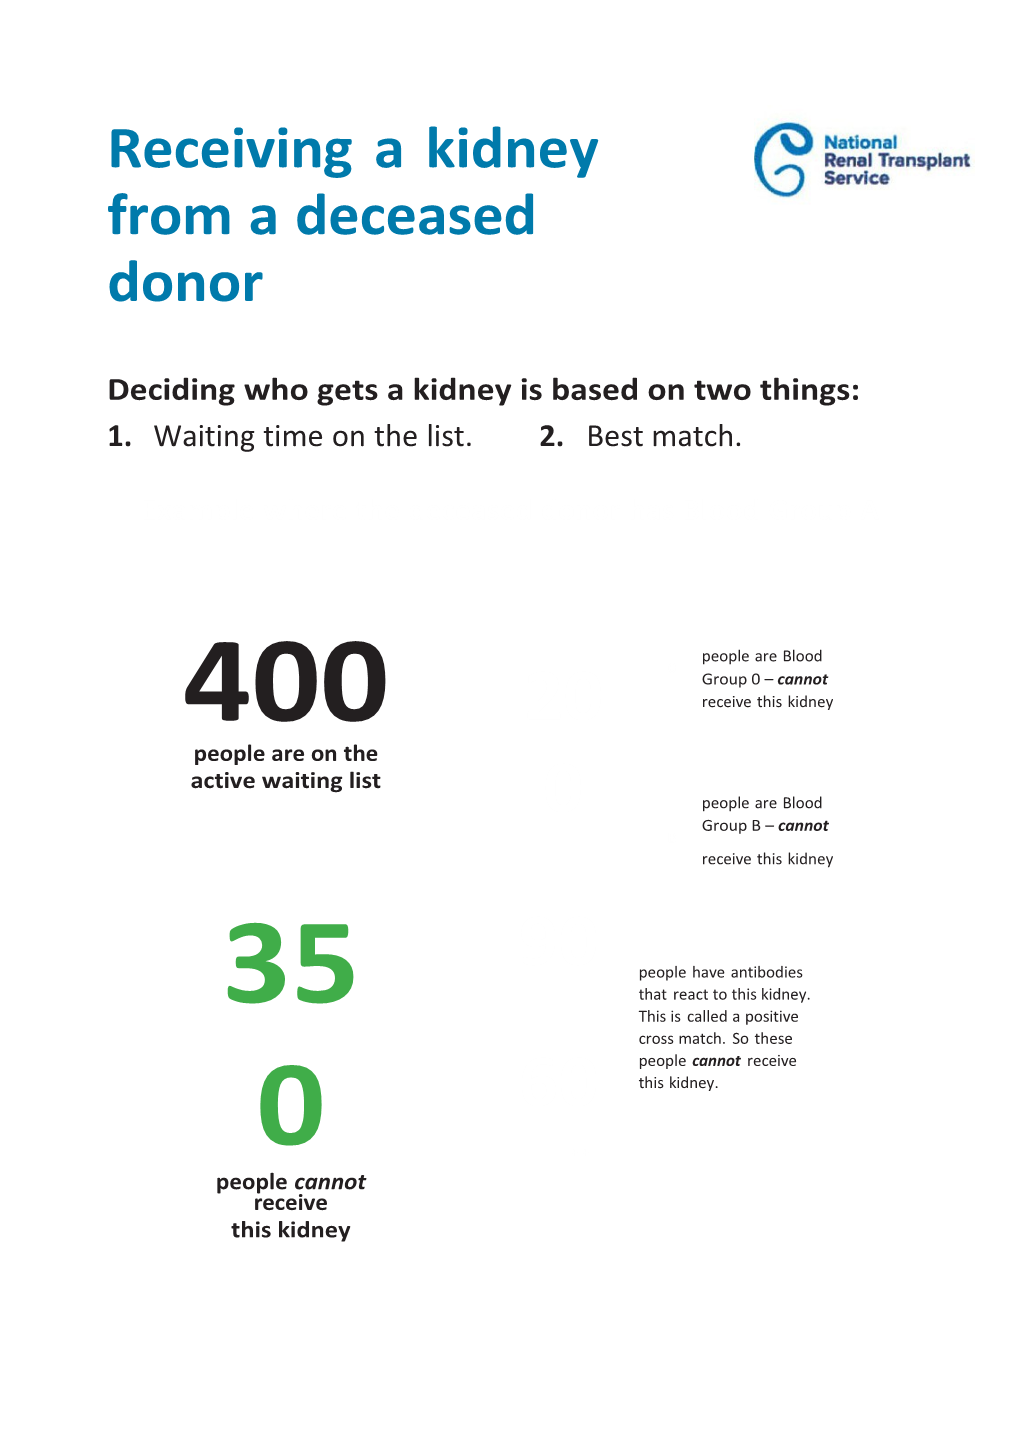 Receiving a Kidney from a Deceased Donor